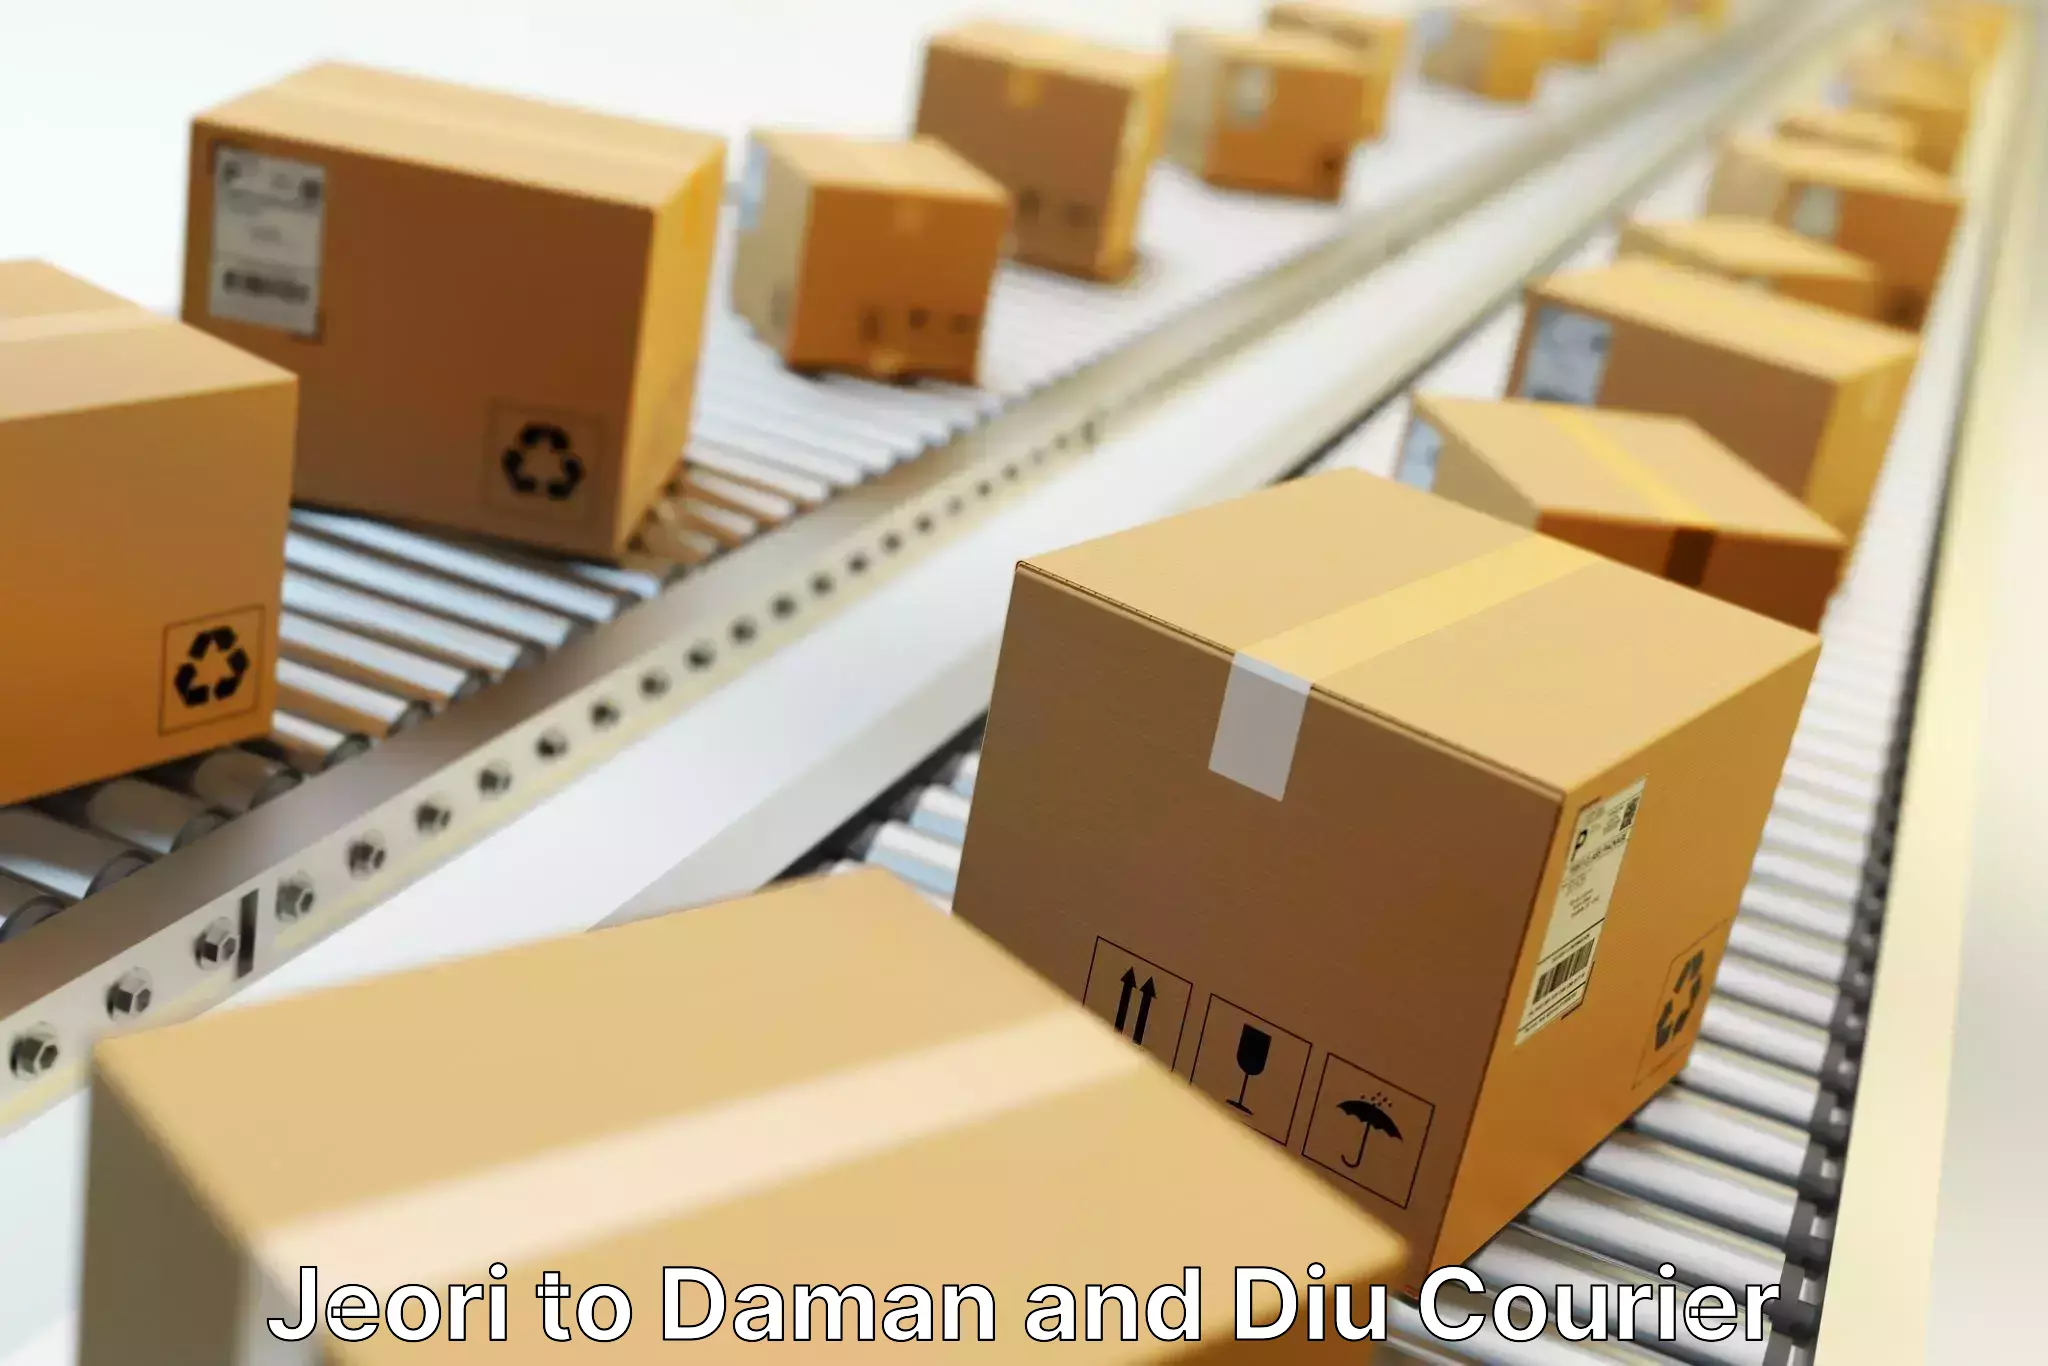 Global courier networks Jeori to Daman and Diu